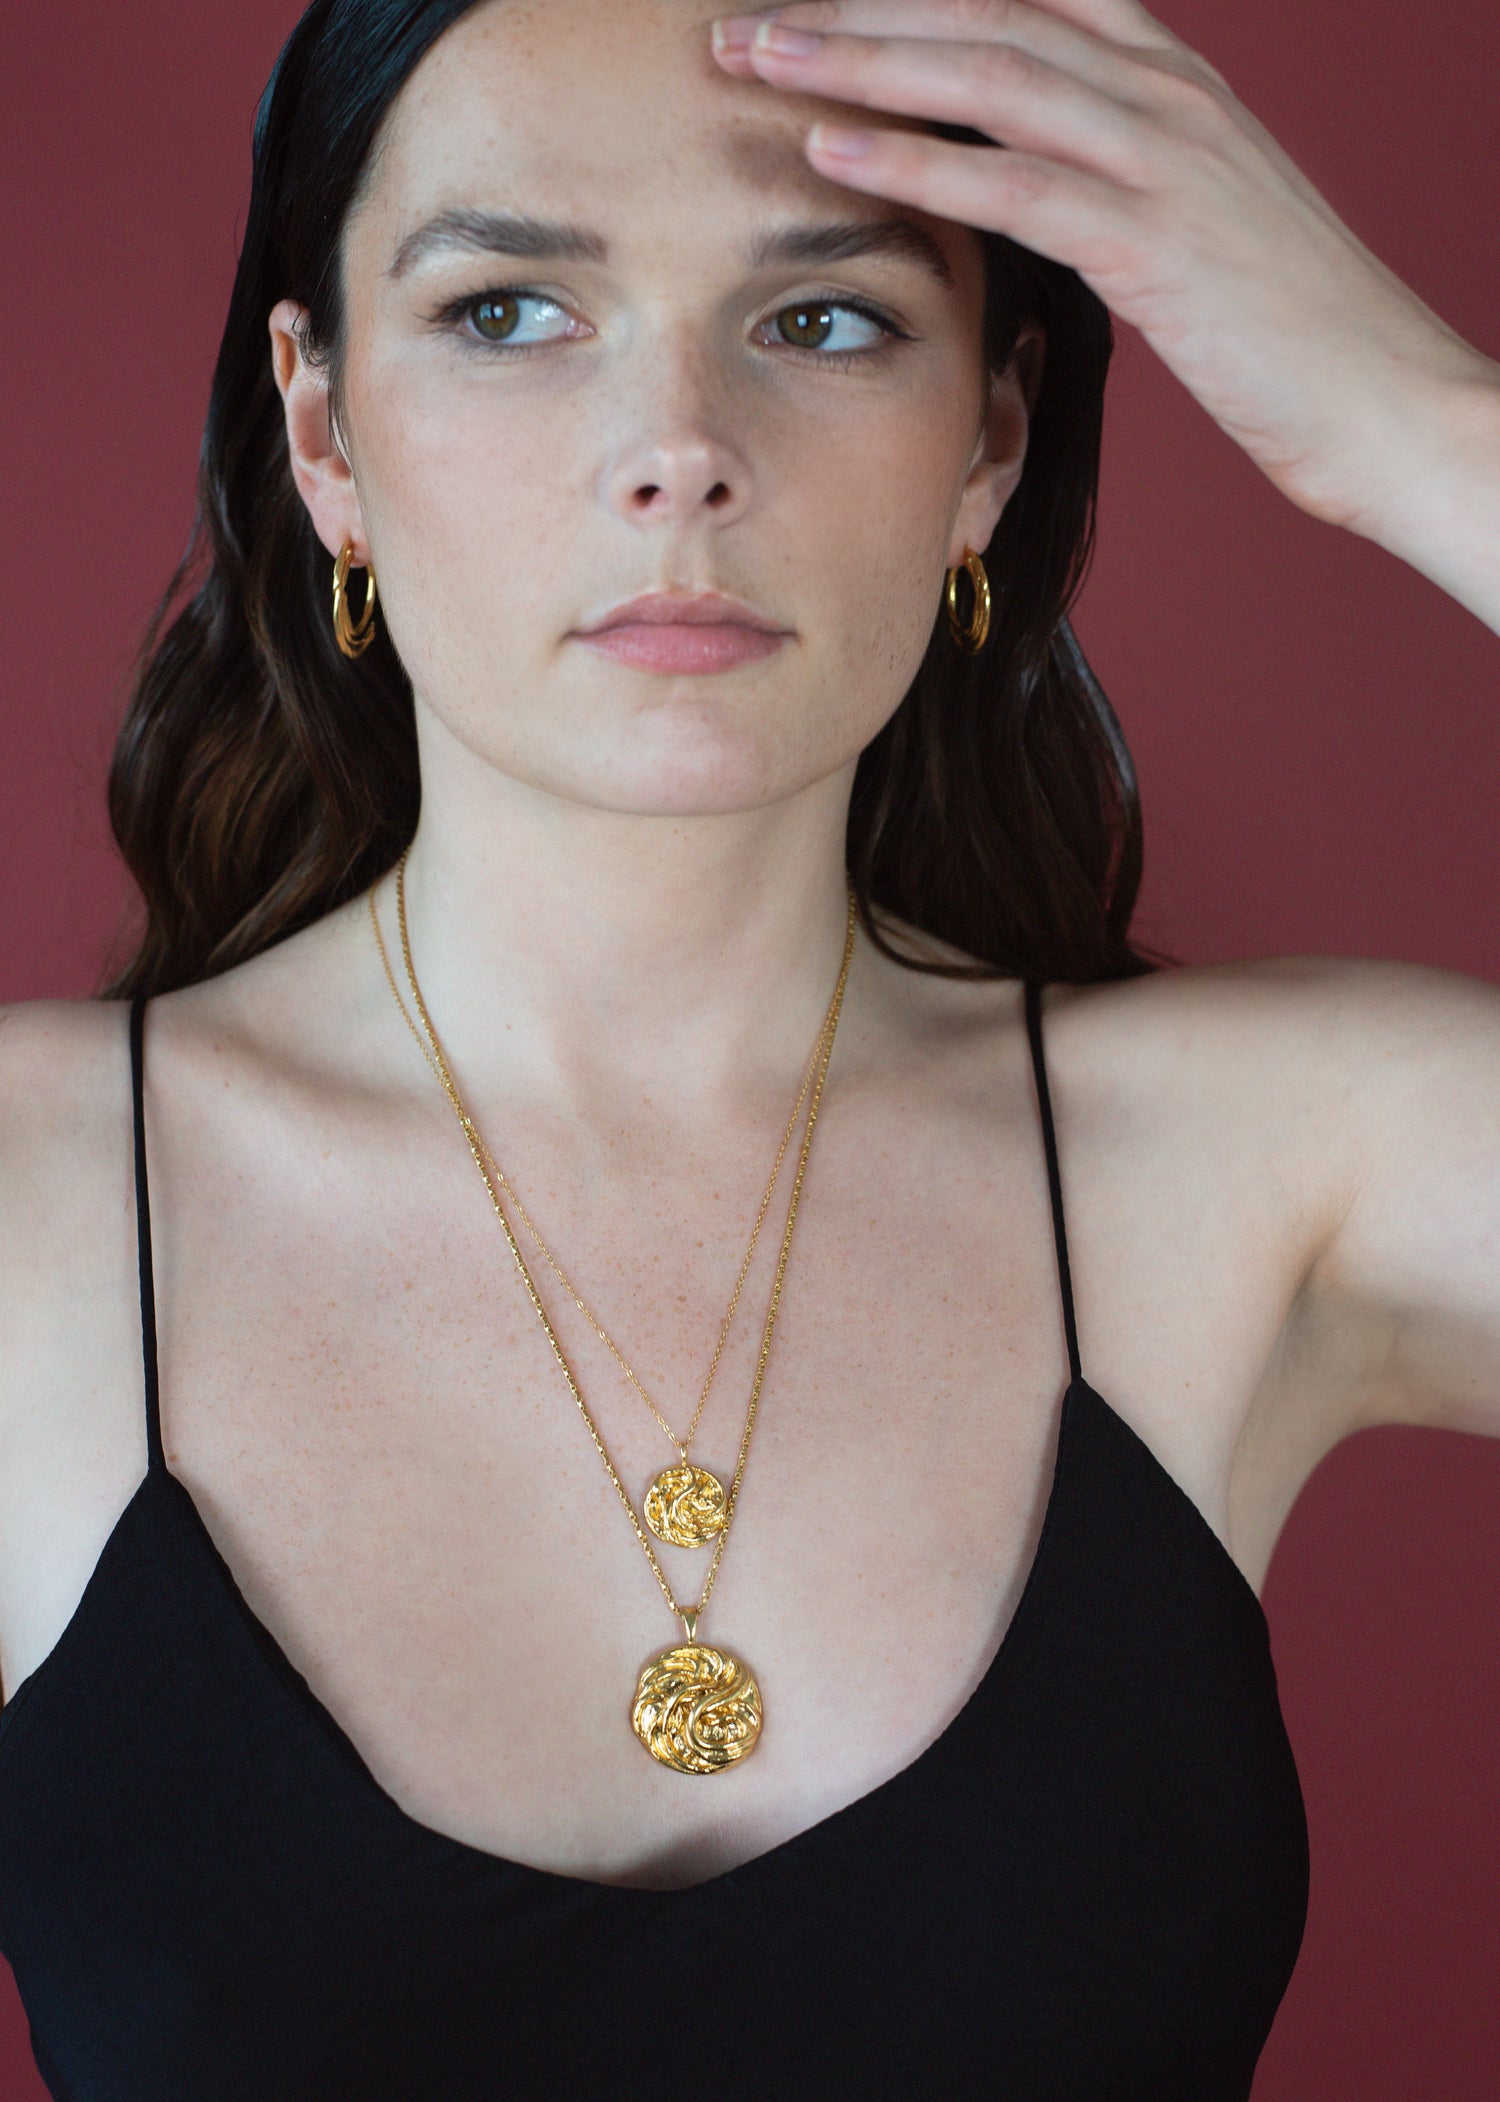 Model wearing hoops with triskele design necklace